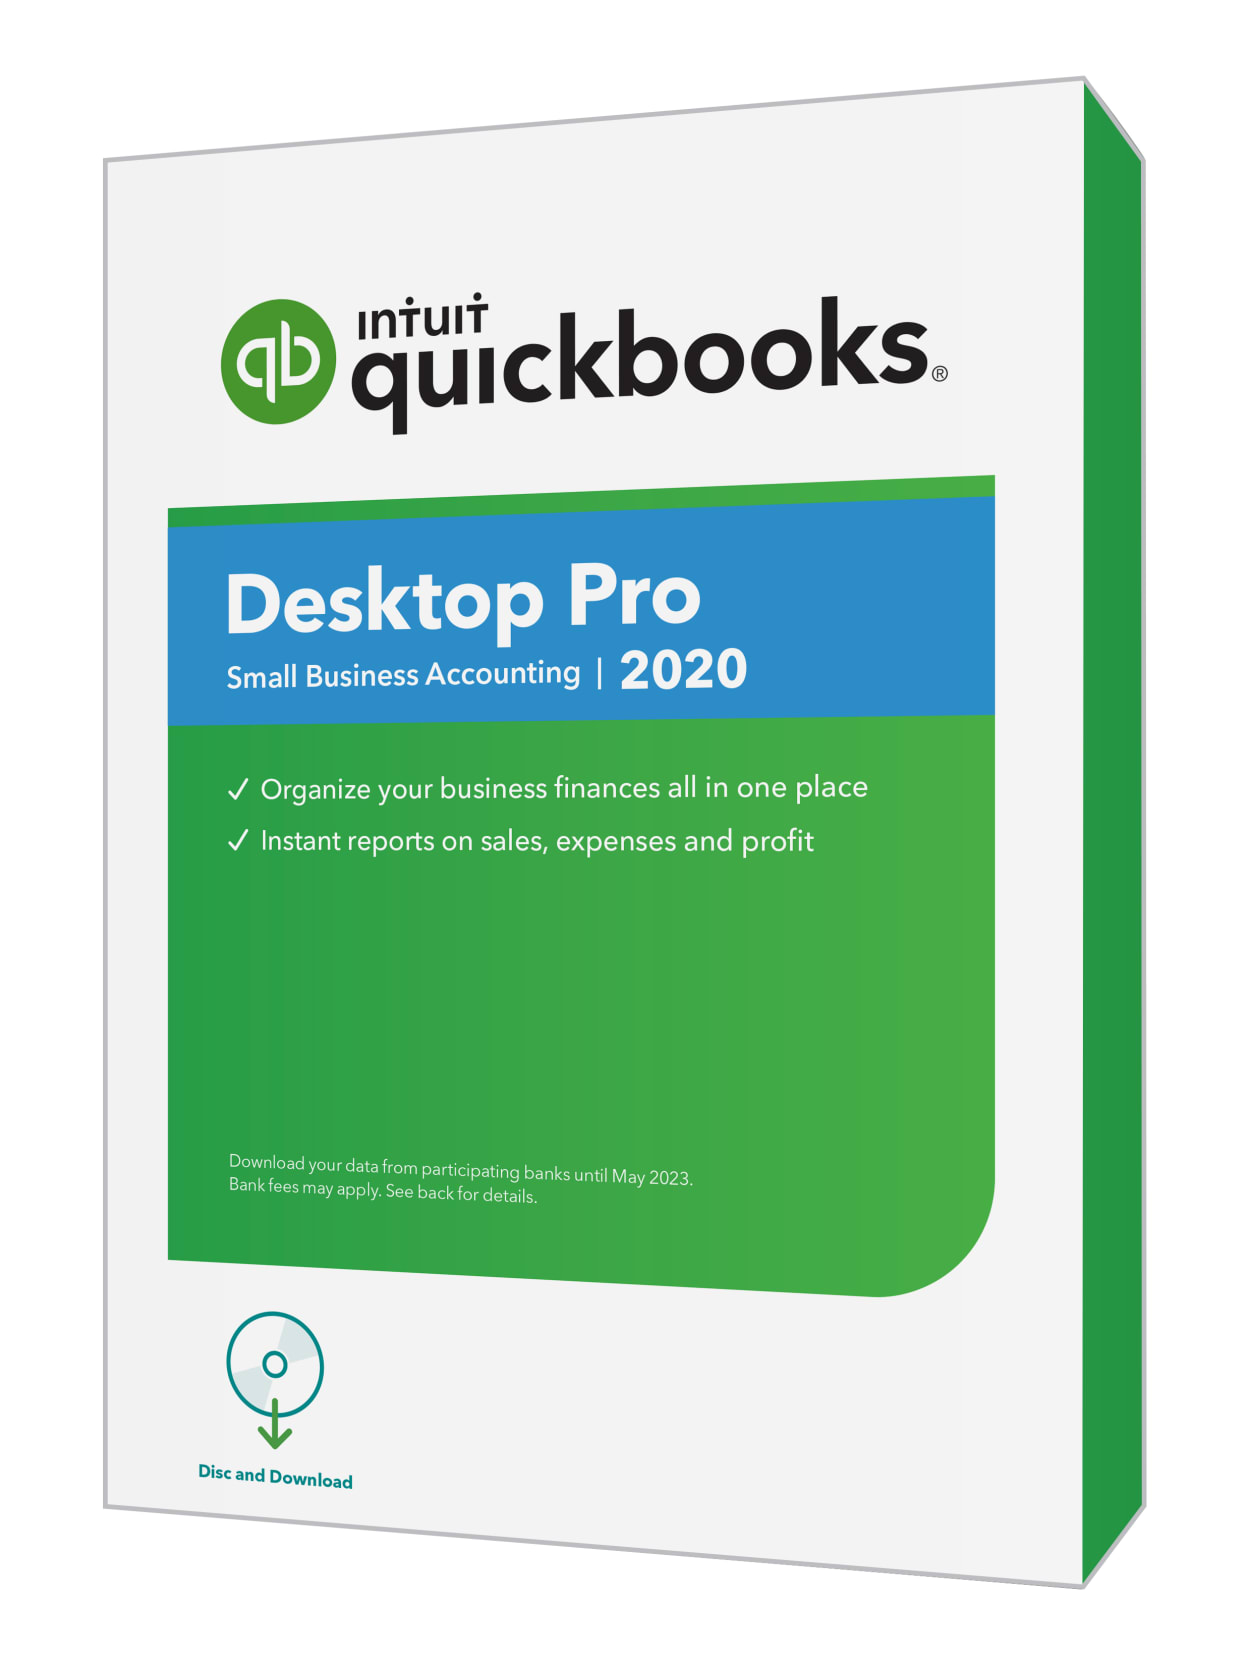 Intuit quicken for mac 2016 reviews